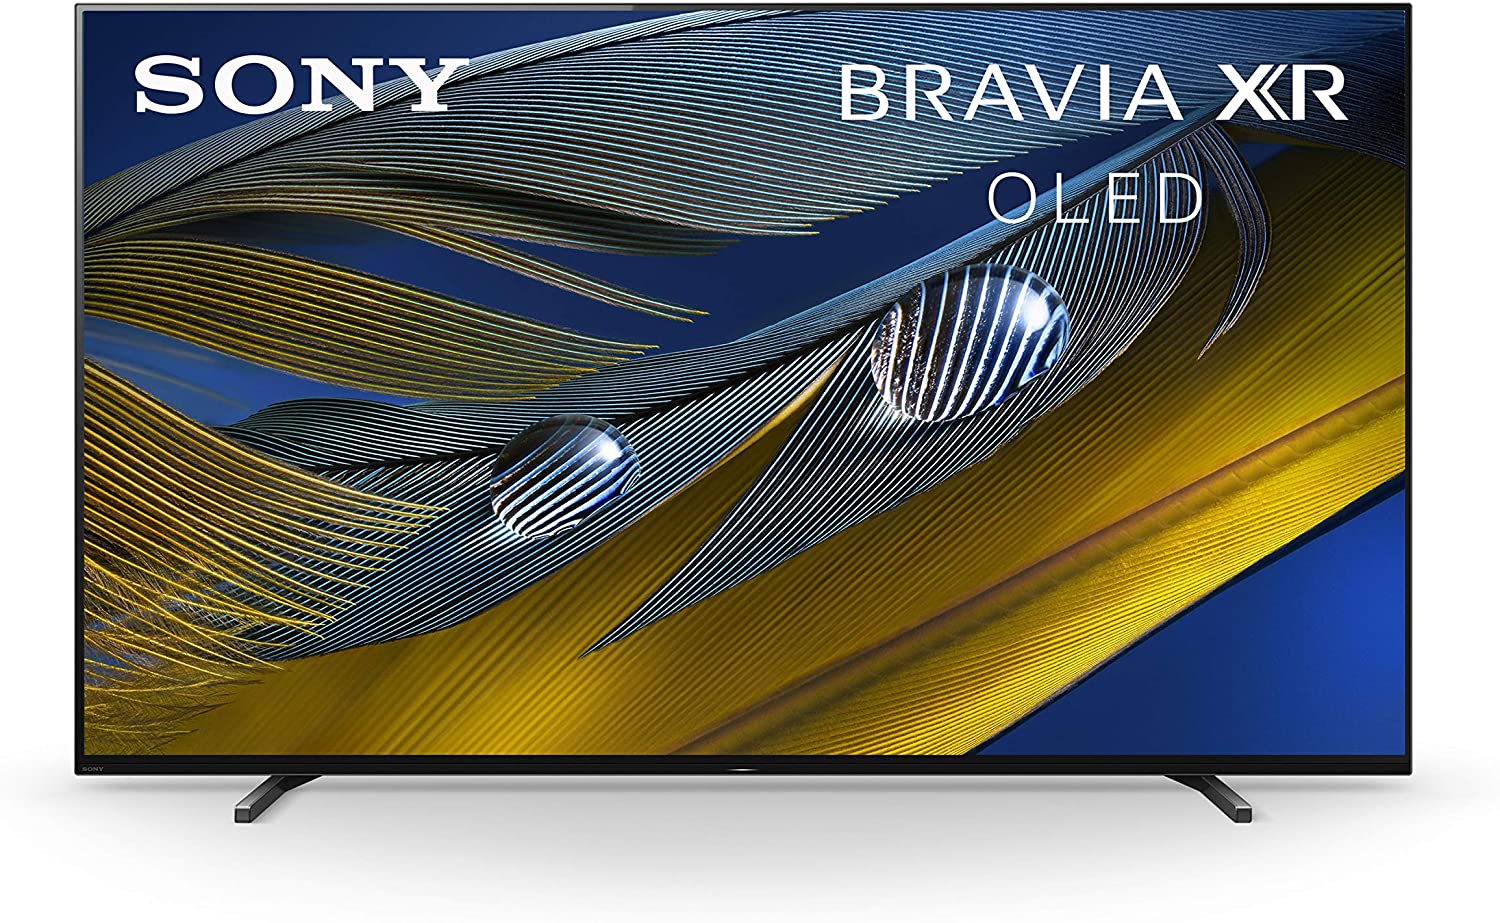 Sony A80J 55 Inch TV: BRAVIA XR OLED 4K Ultra HD Smart Google TV with Dolby Vision HDR and Alexa Com